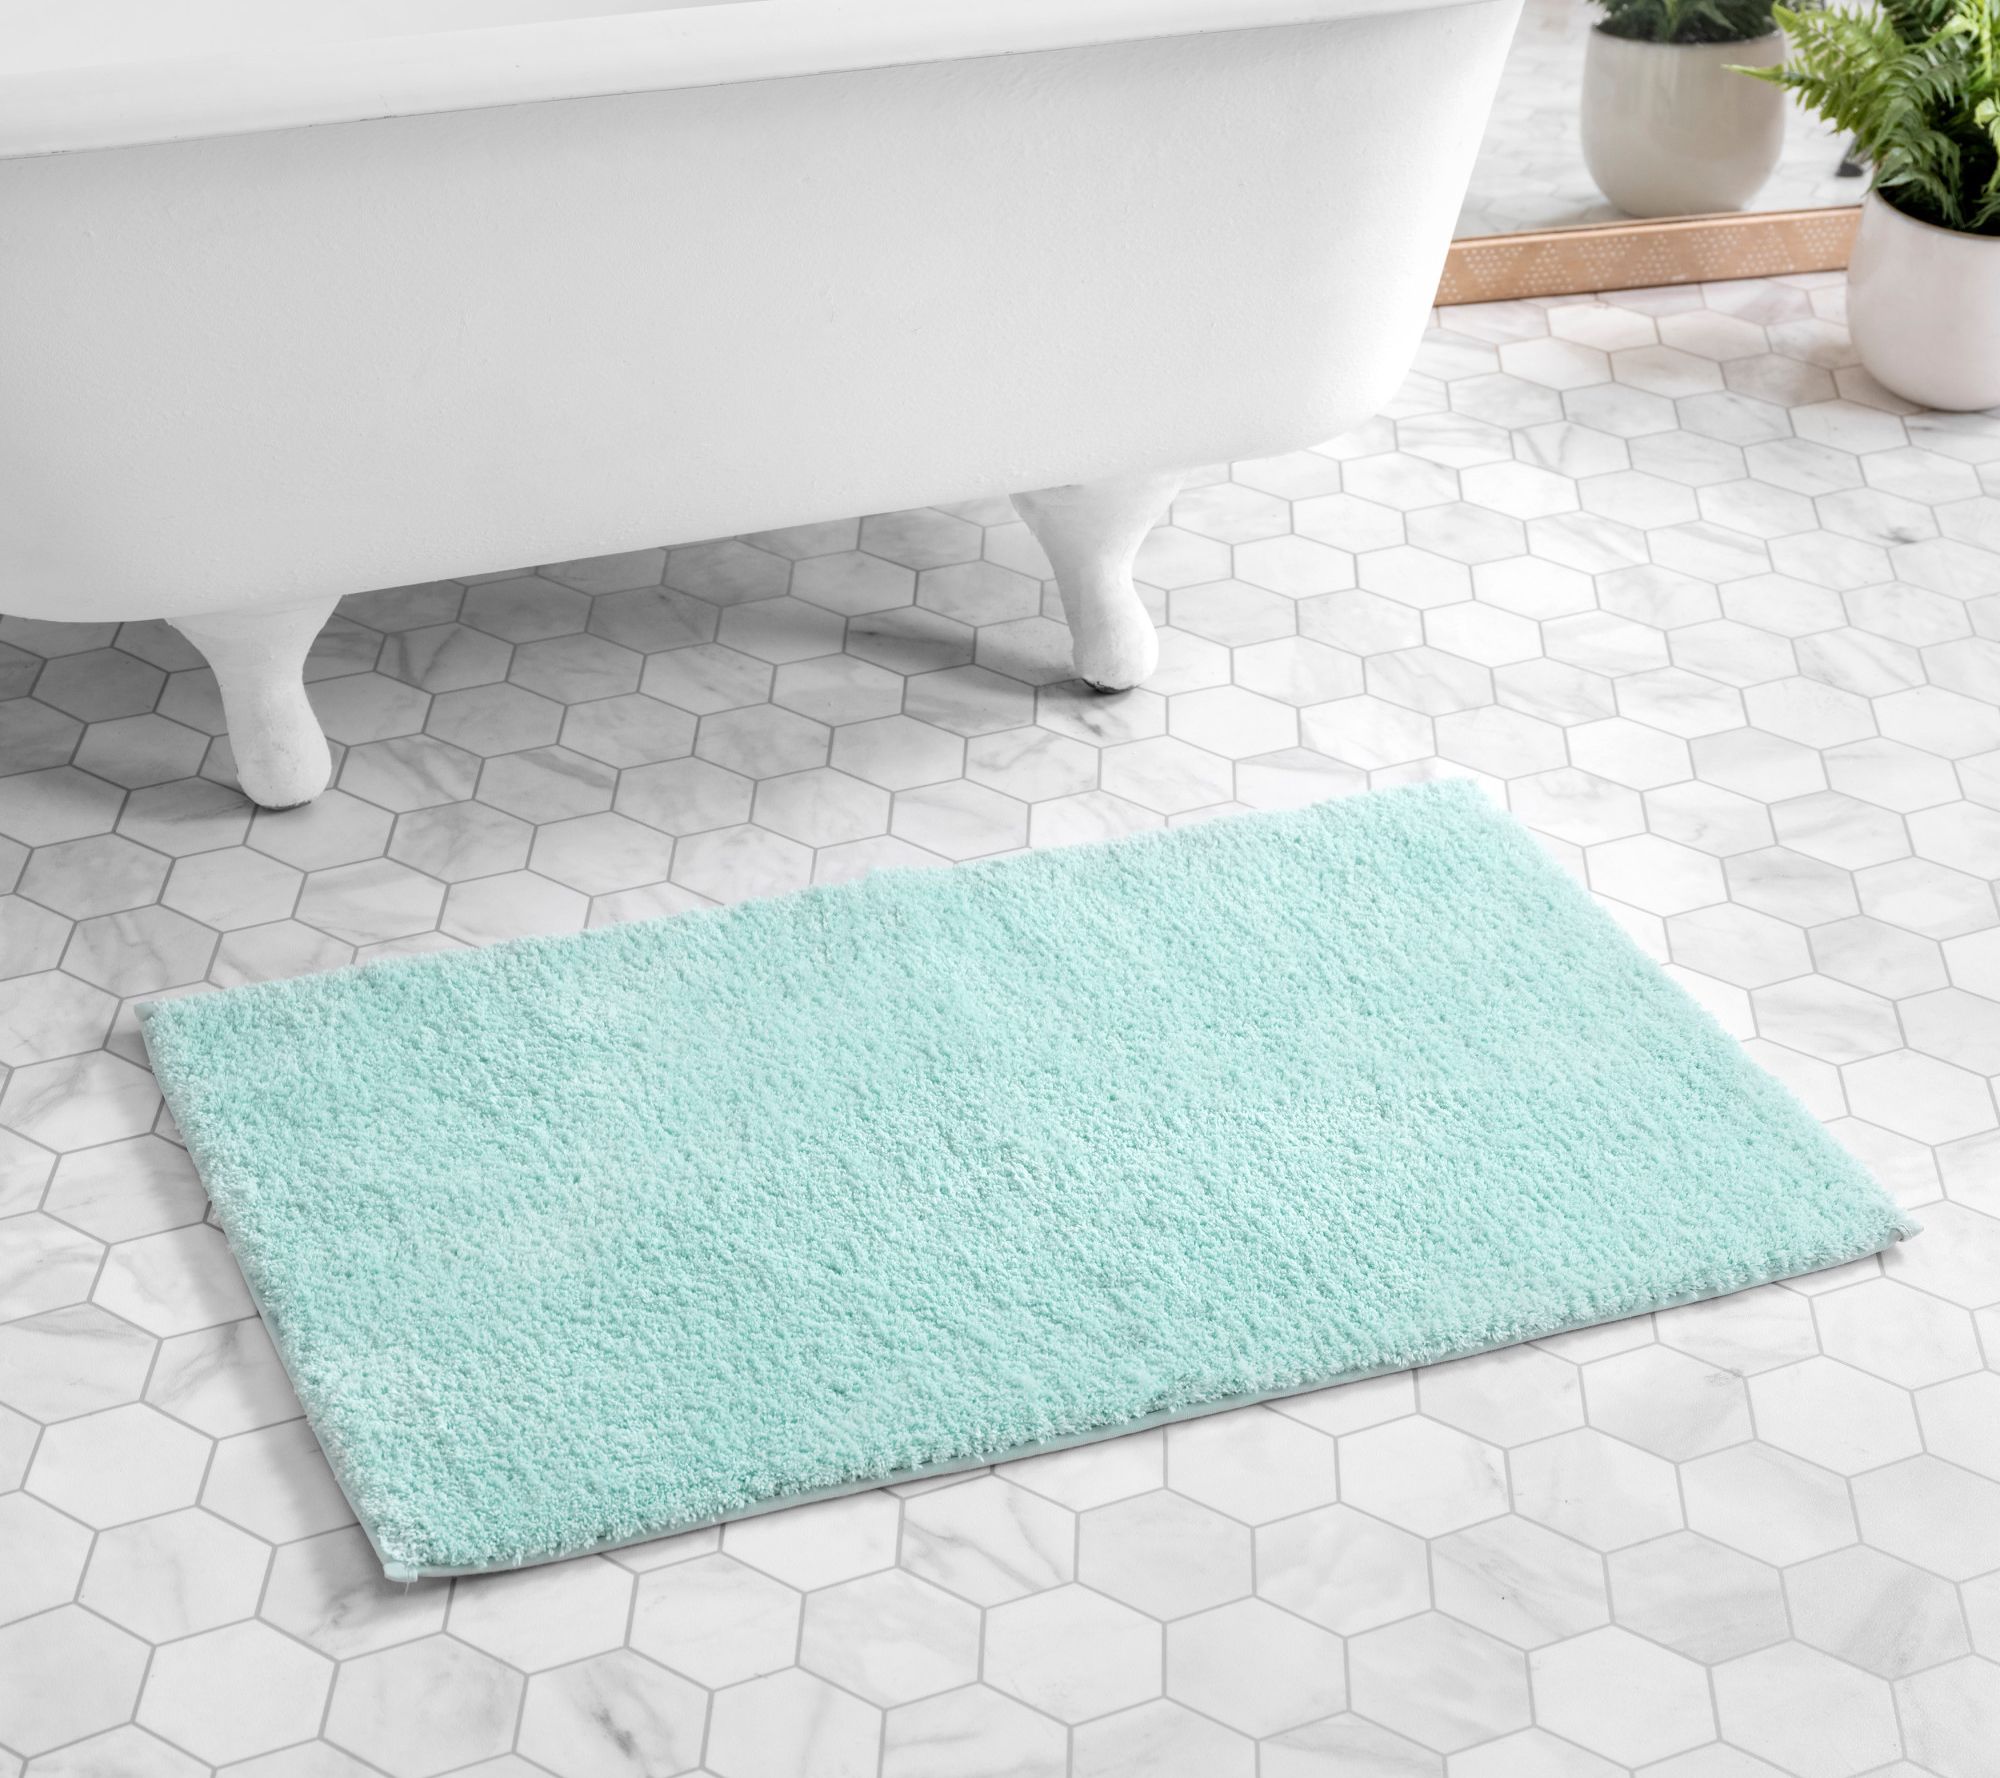 Solid Luxury Super Absorbent Bath Mat Carpet For Rooms Quick Dry